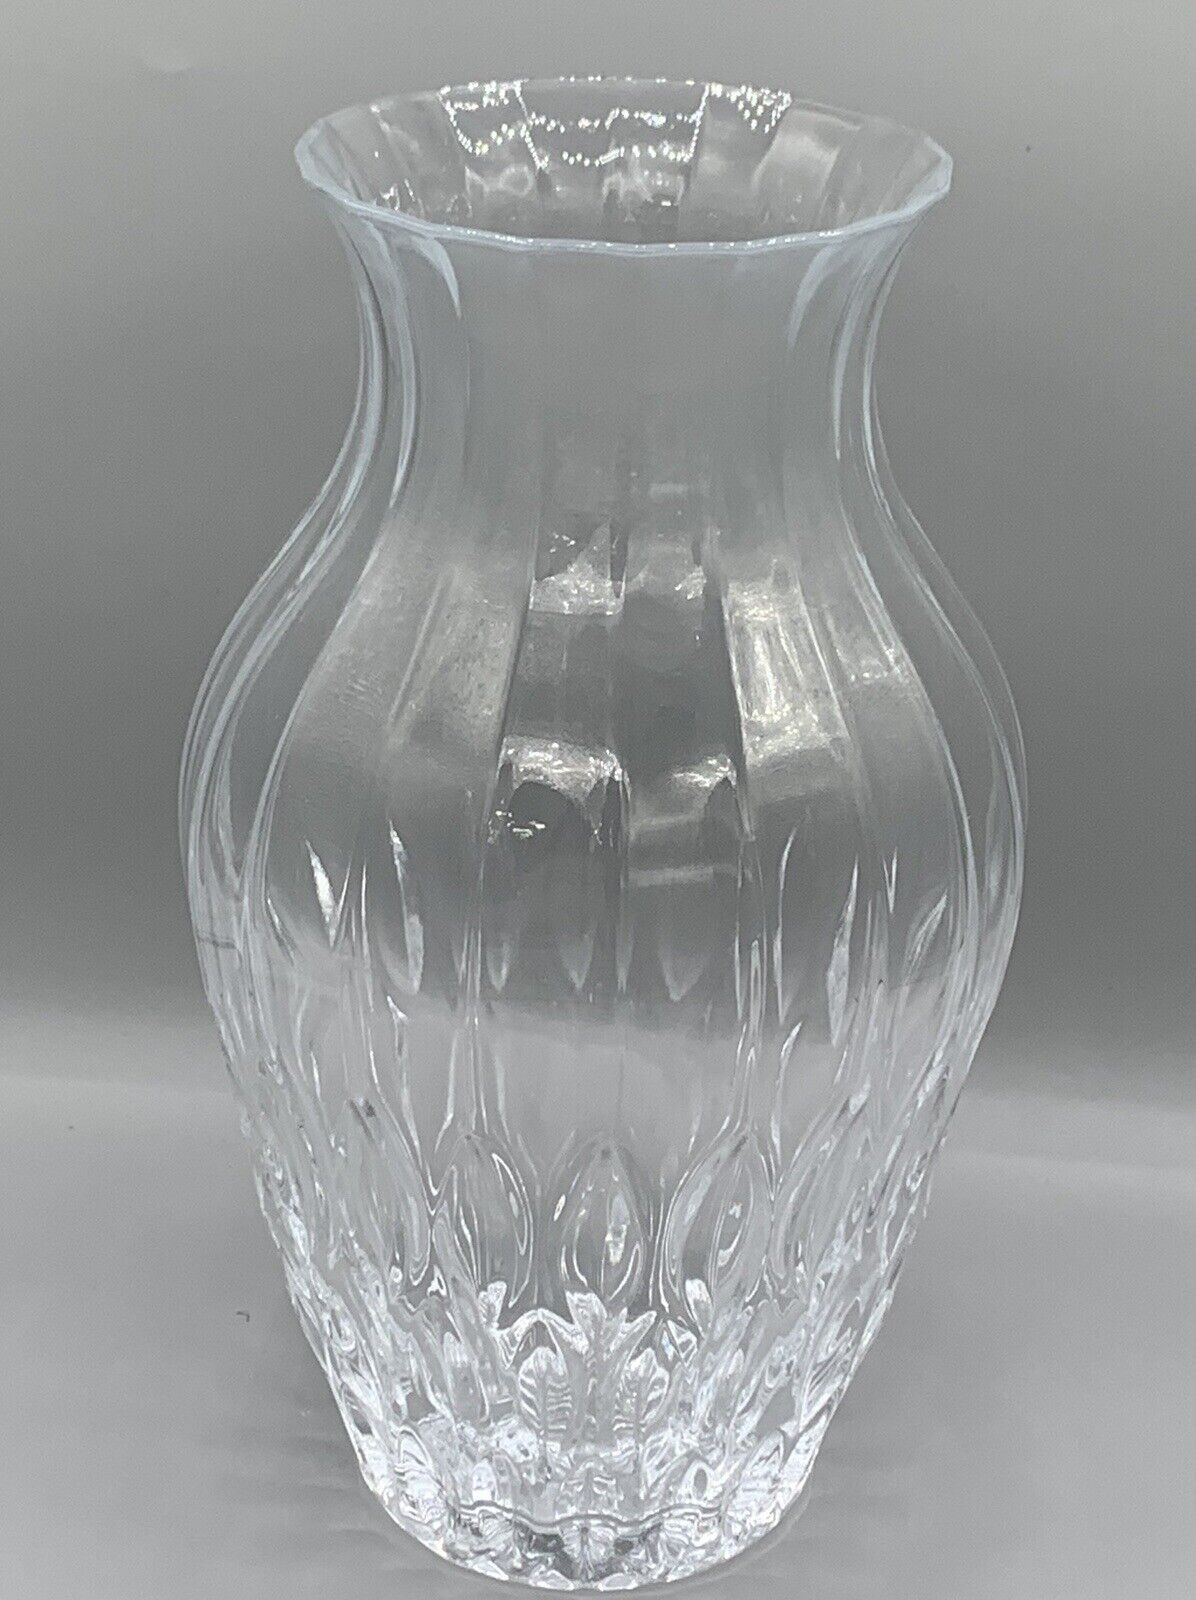 10 “ Vintage Lead Crystal Vase.  Faceted cut has a sparkling reflective finish.